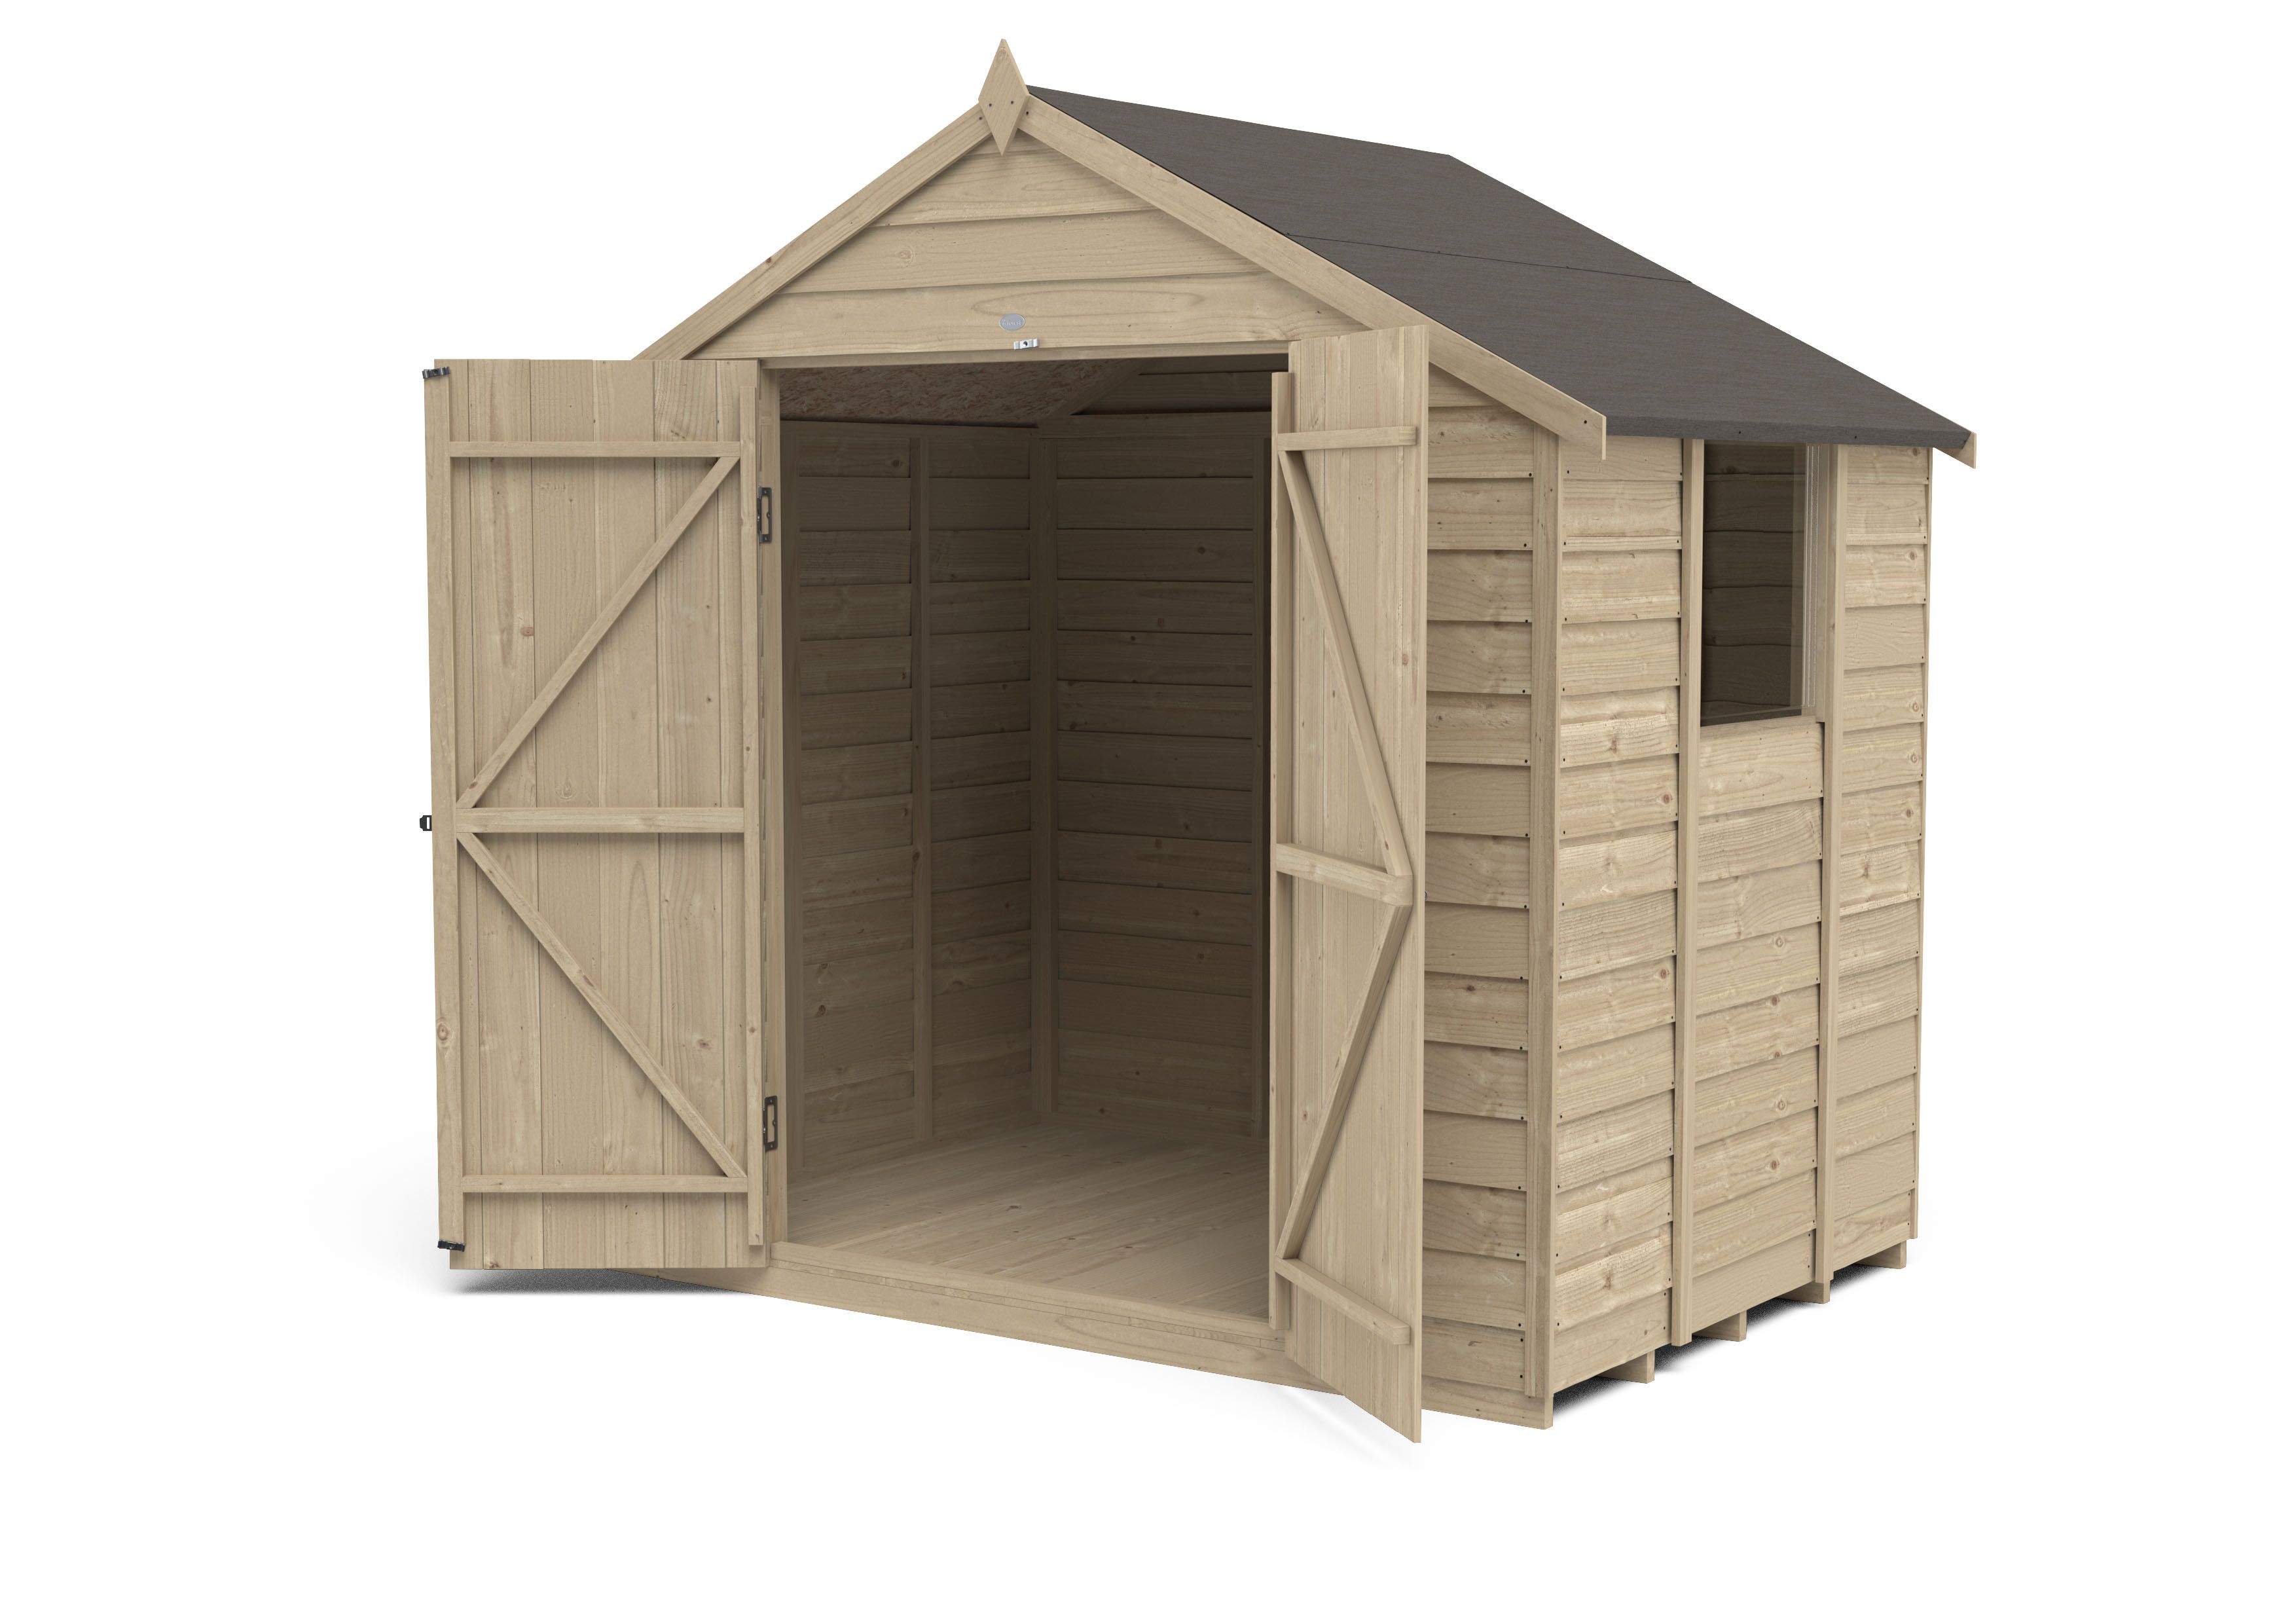 Forest Garden Overlap 7x5 ft Apex Wooden Pressure treated 2 door Shed with floor & 1 window (Base included) - Assembly service included